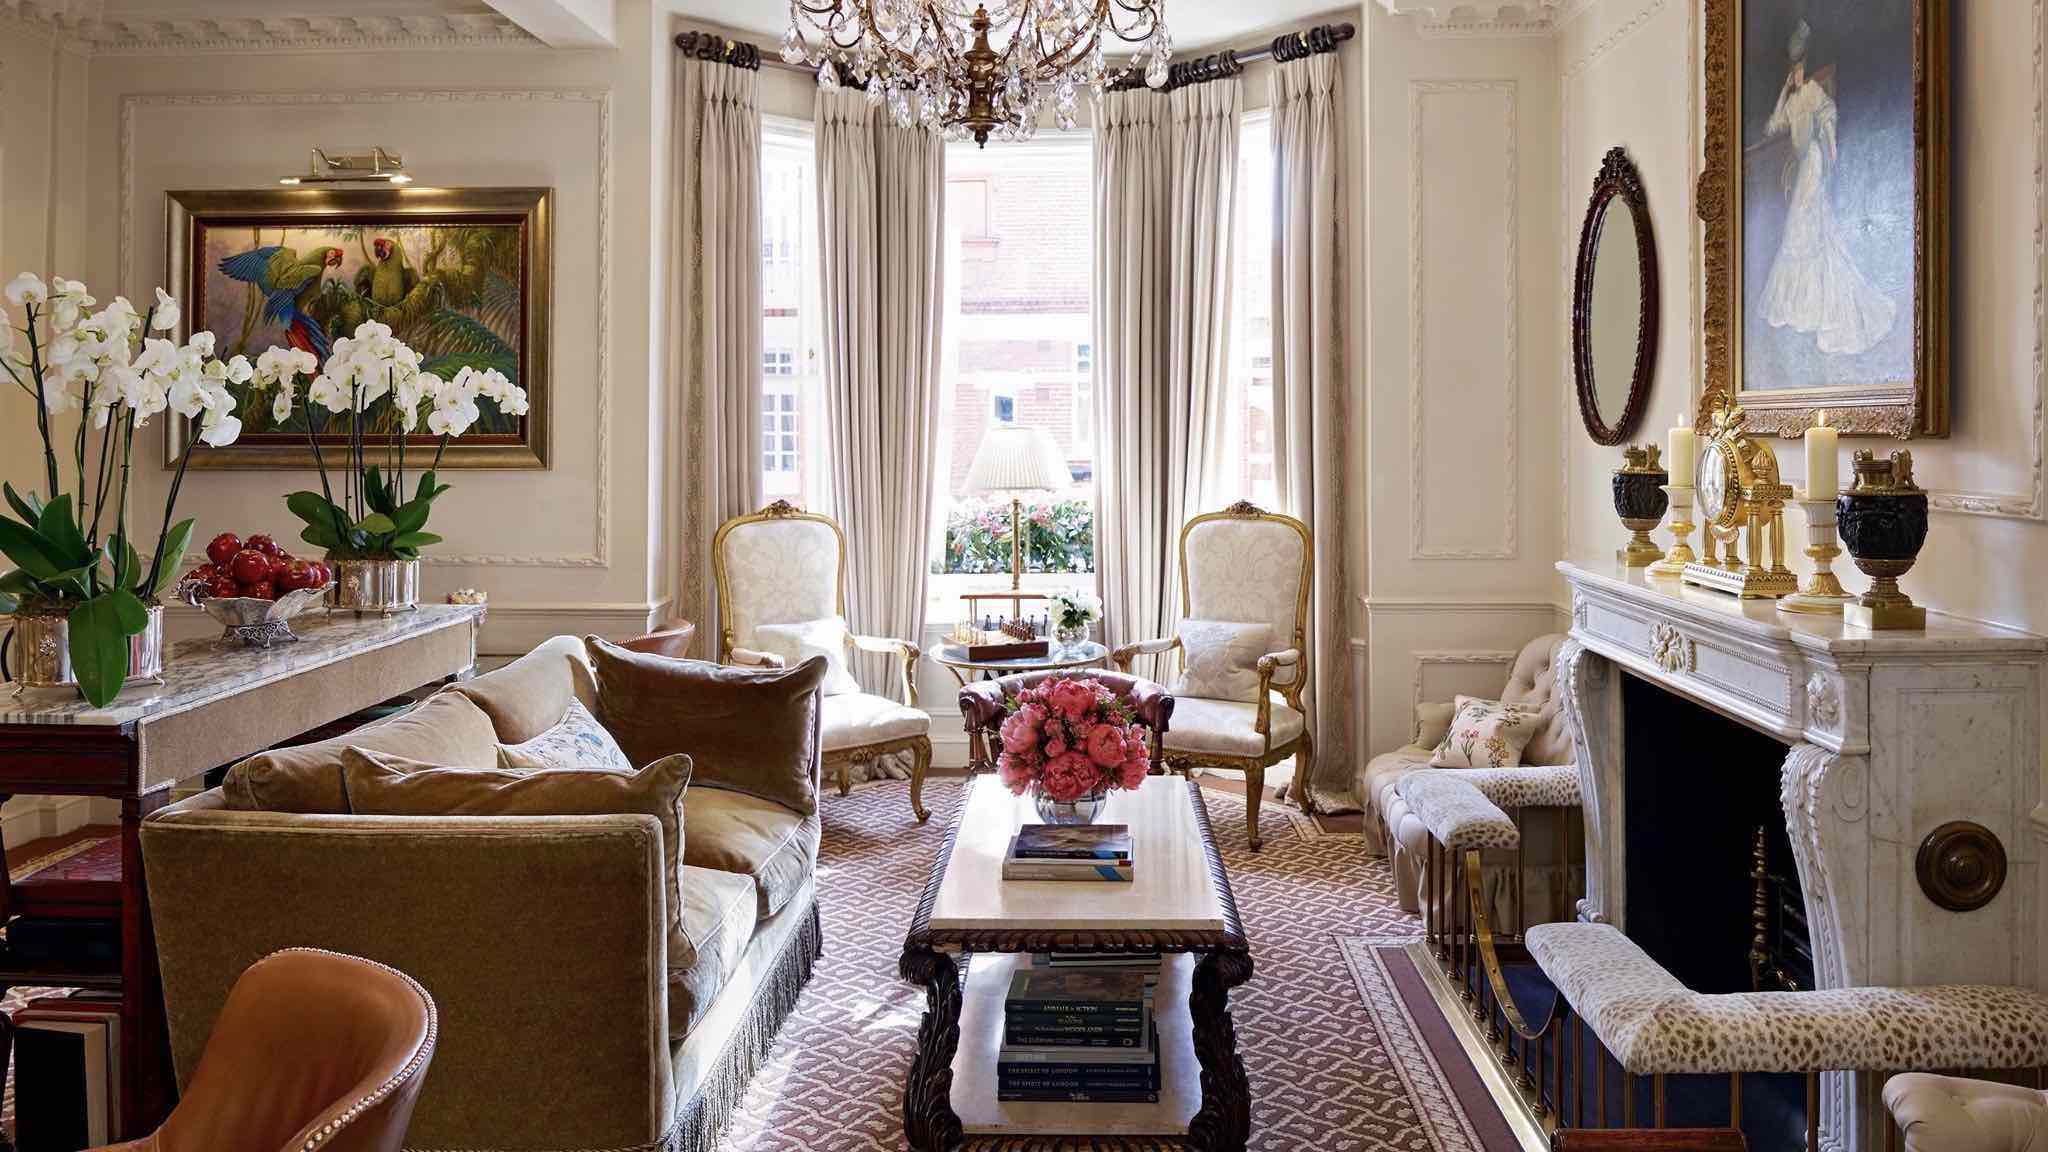 The Egerton House Hotel - Interior suite in boutique hotel in Chelsea